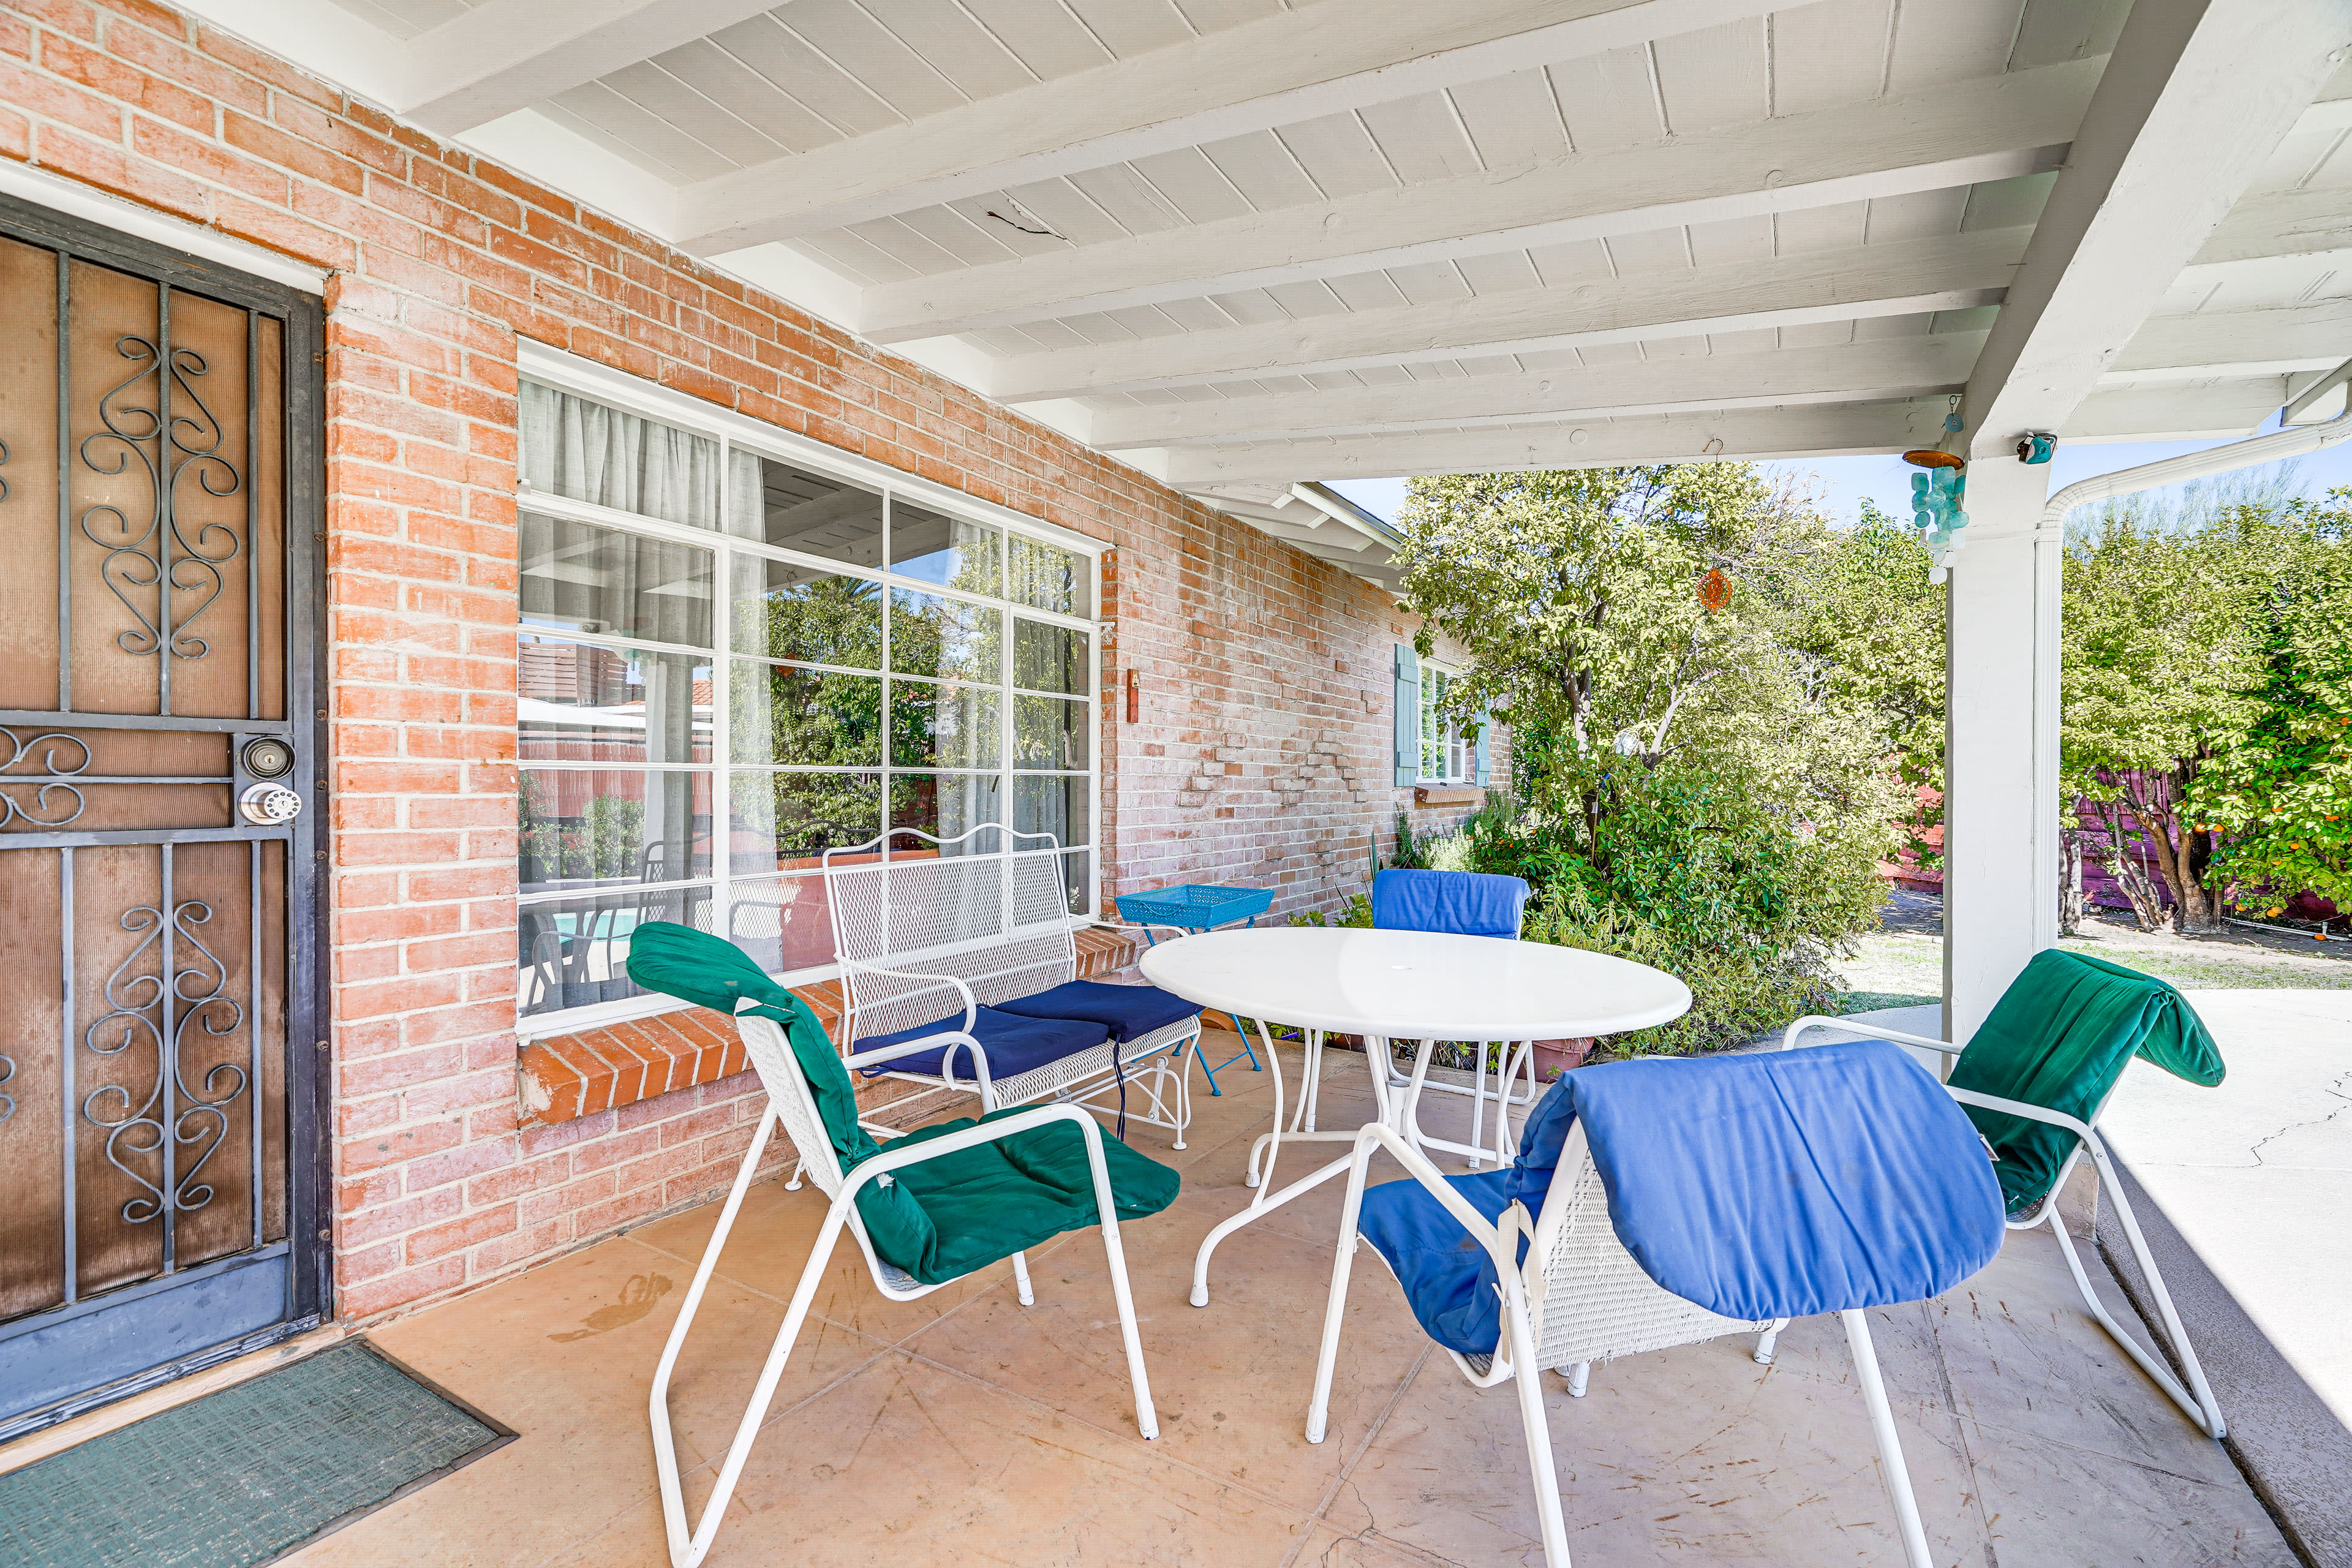 Covered Patio | Gas Grill | Pool | Complimentary Golf Clubs & Tennis Rackets